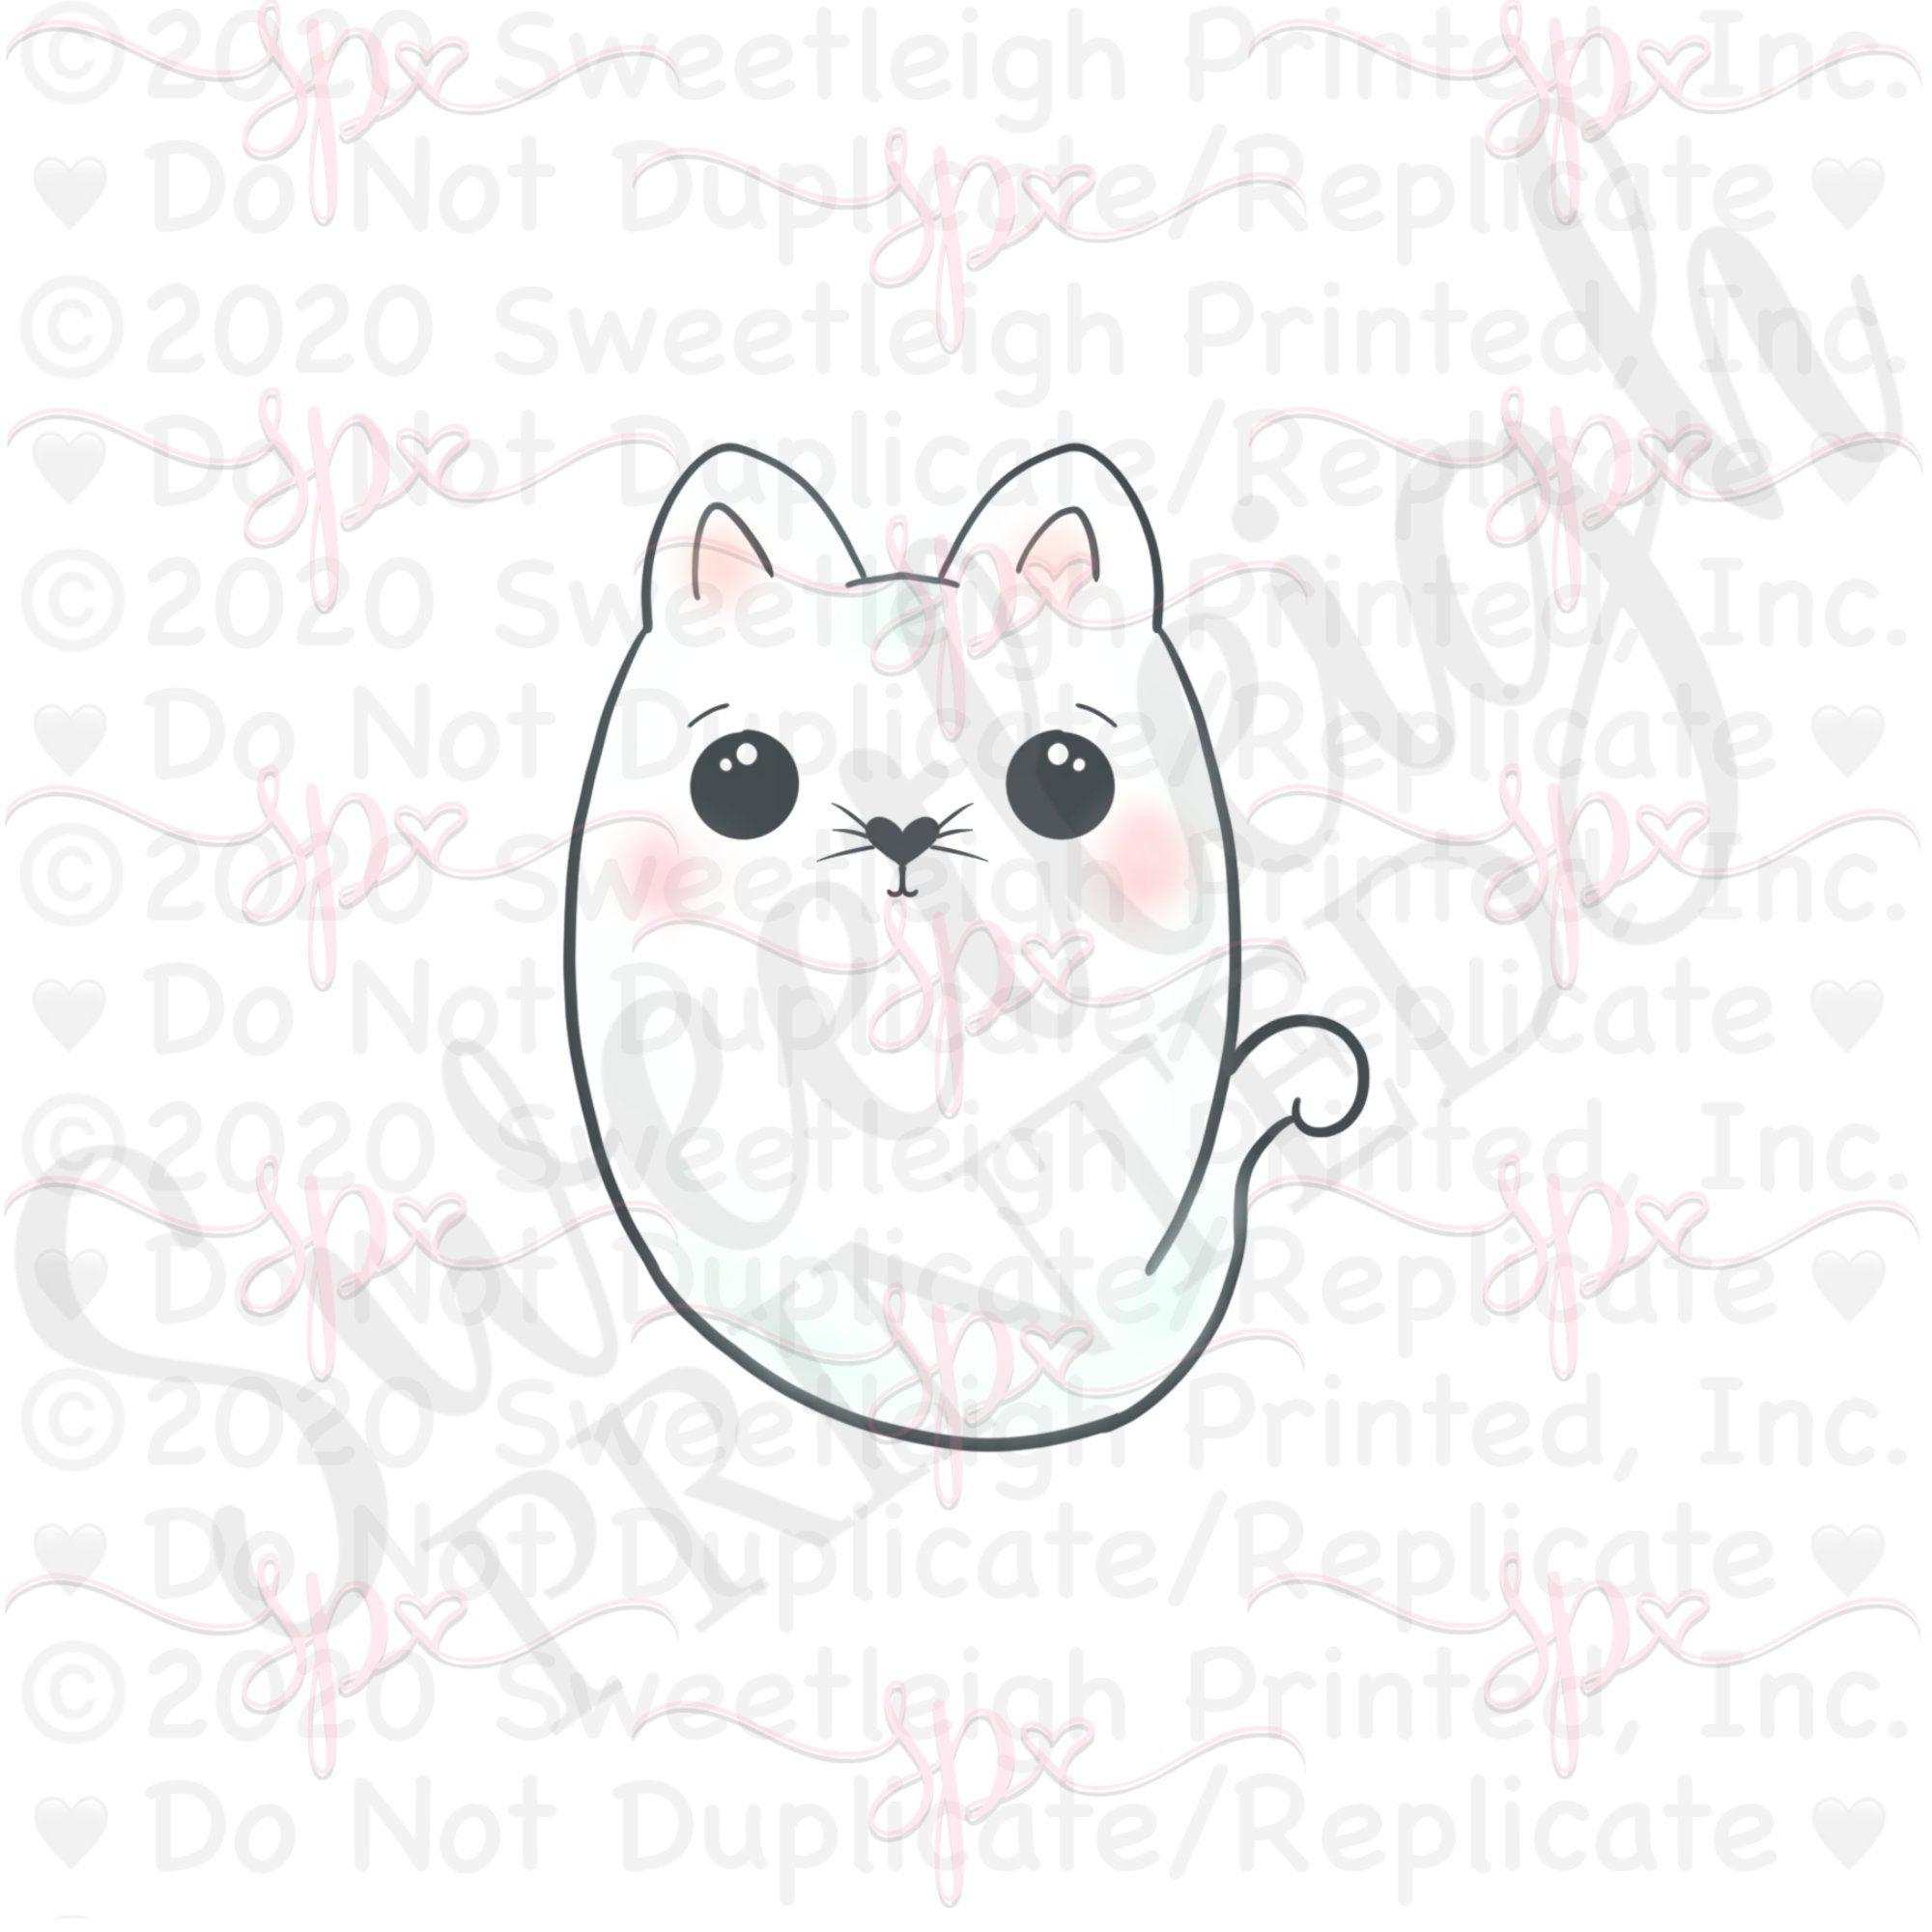 Ghost Cat Cookie Cutter - Sweetleigh 